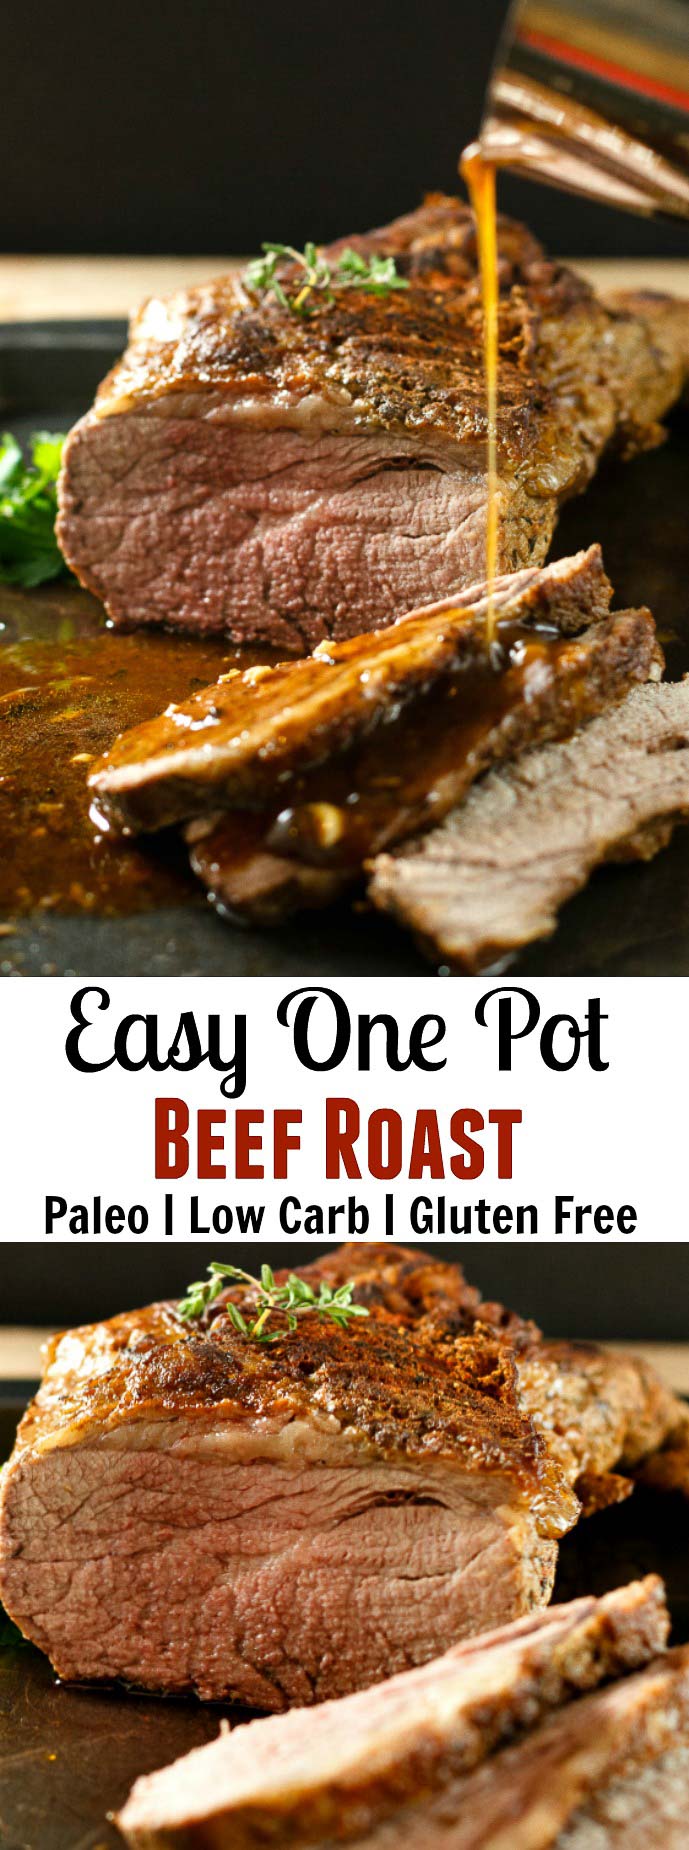 Easy One Pot Beef Roast with Wine Sauce- Low Carb Paleo- 